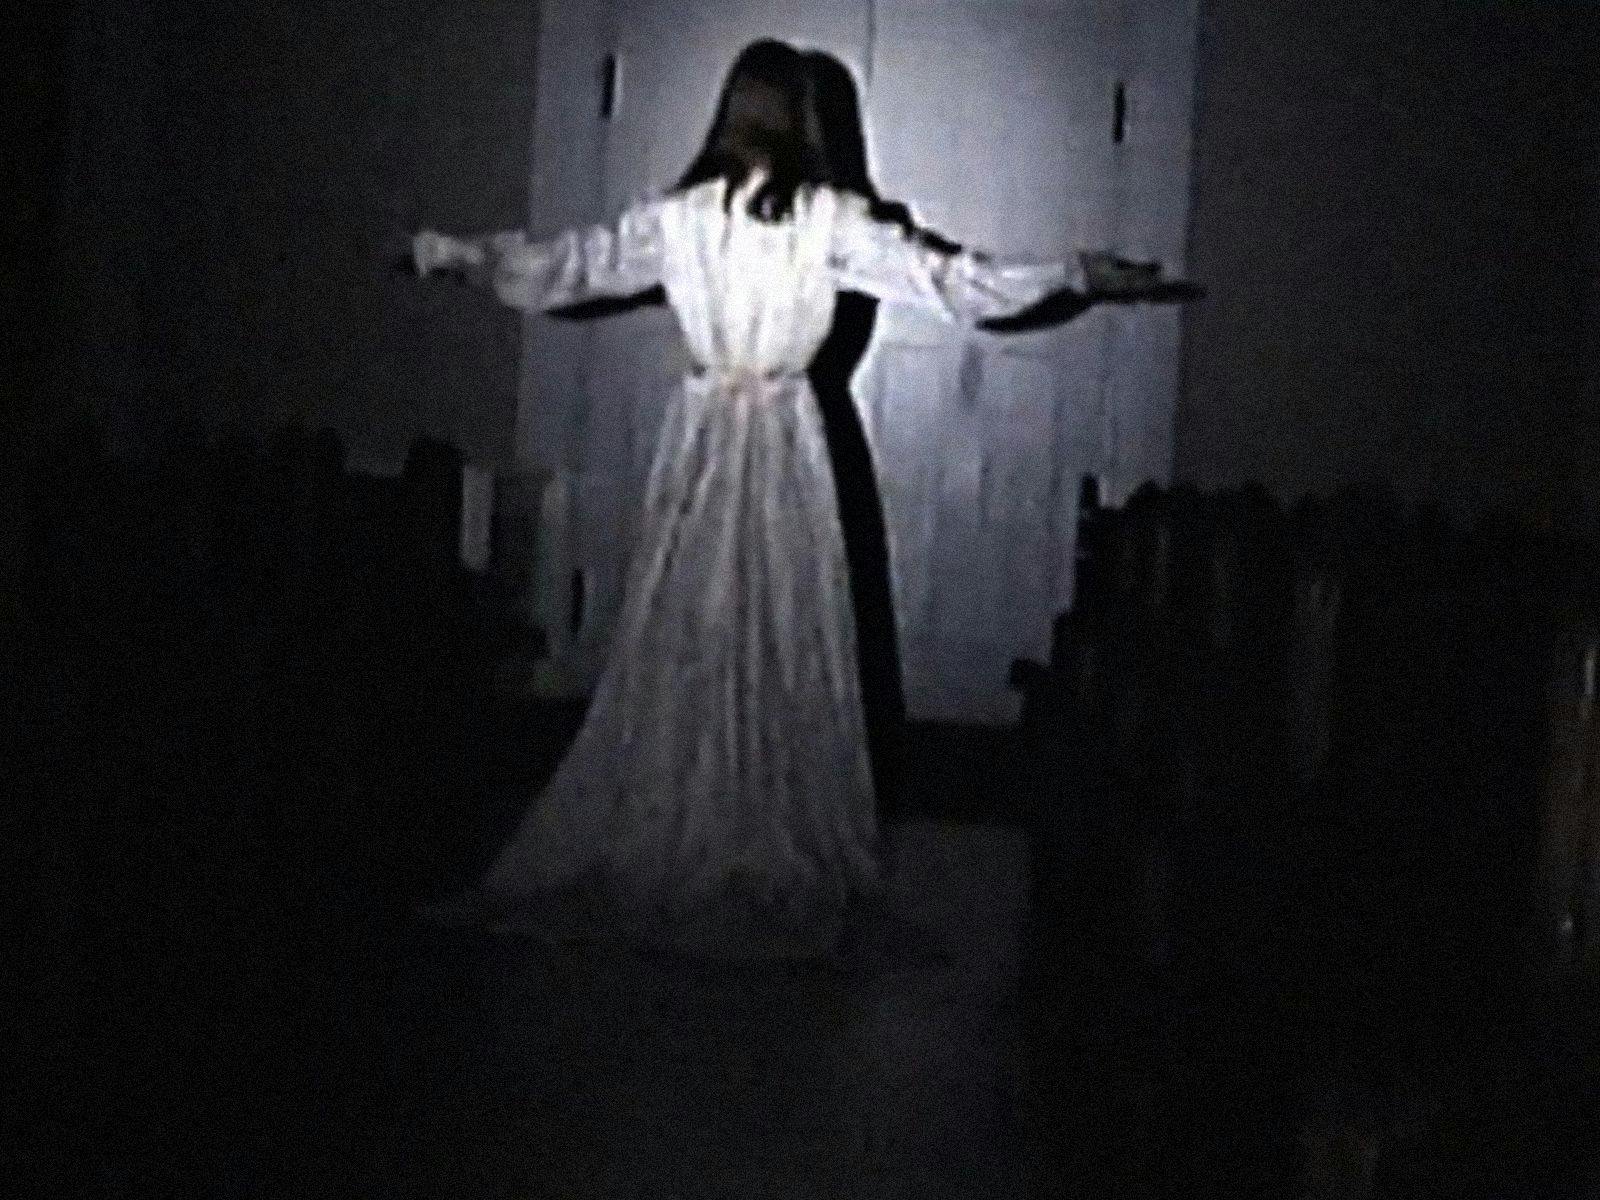 A frame from Ethel Cain's music video.